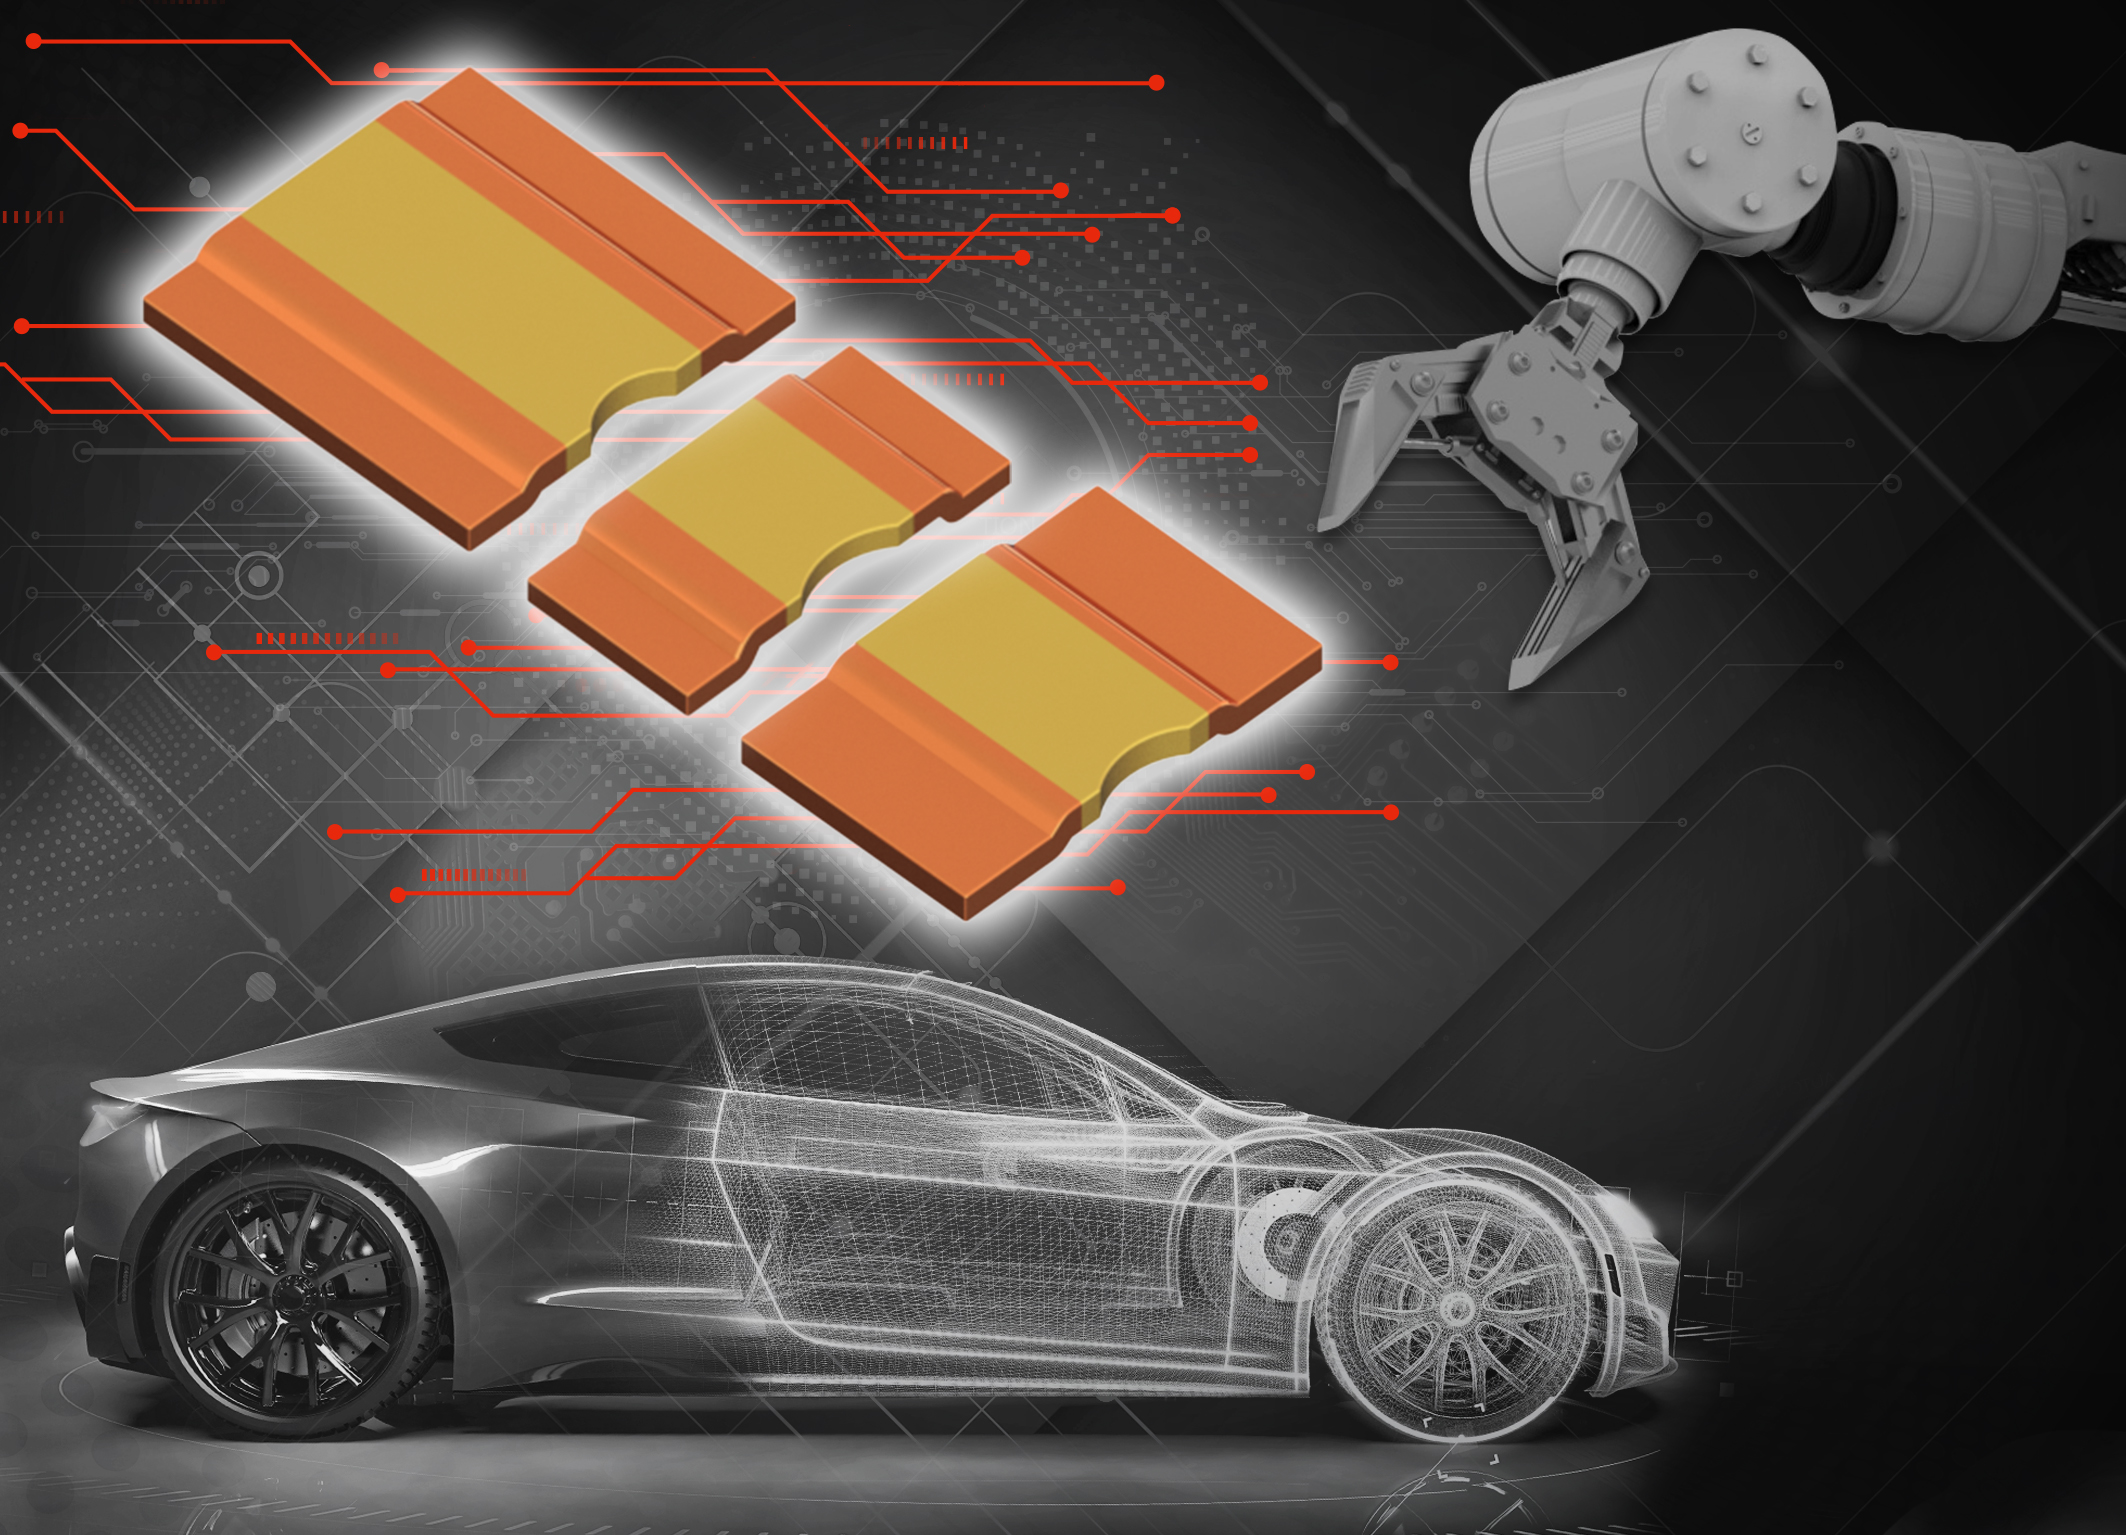 ROHM Introduces Ultra-Low-Profile, 12W Rated Metal Plate Shunt Resistor